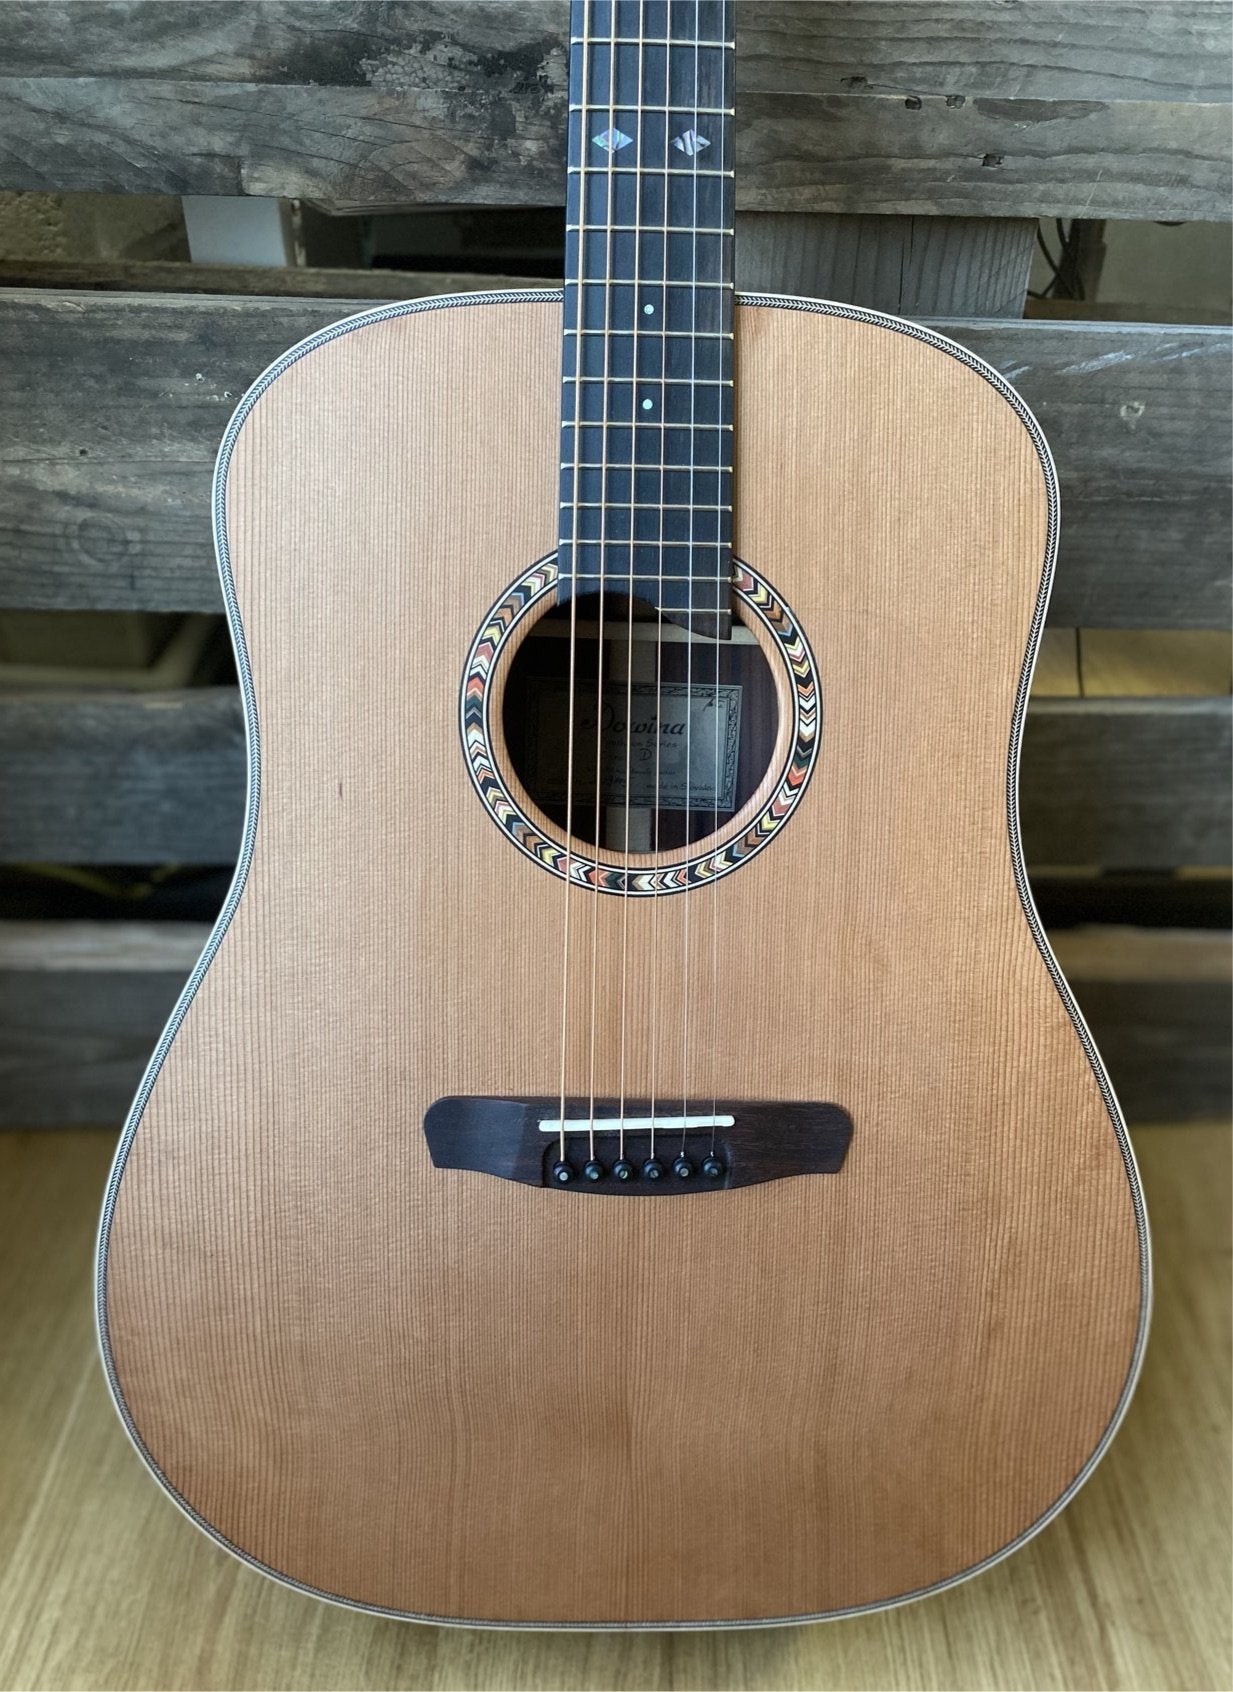 Dowina Rosewood (Ceres) Dreadnought, Acoustic Guitar for sale at Richards Guitars.